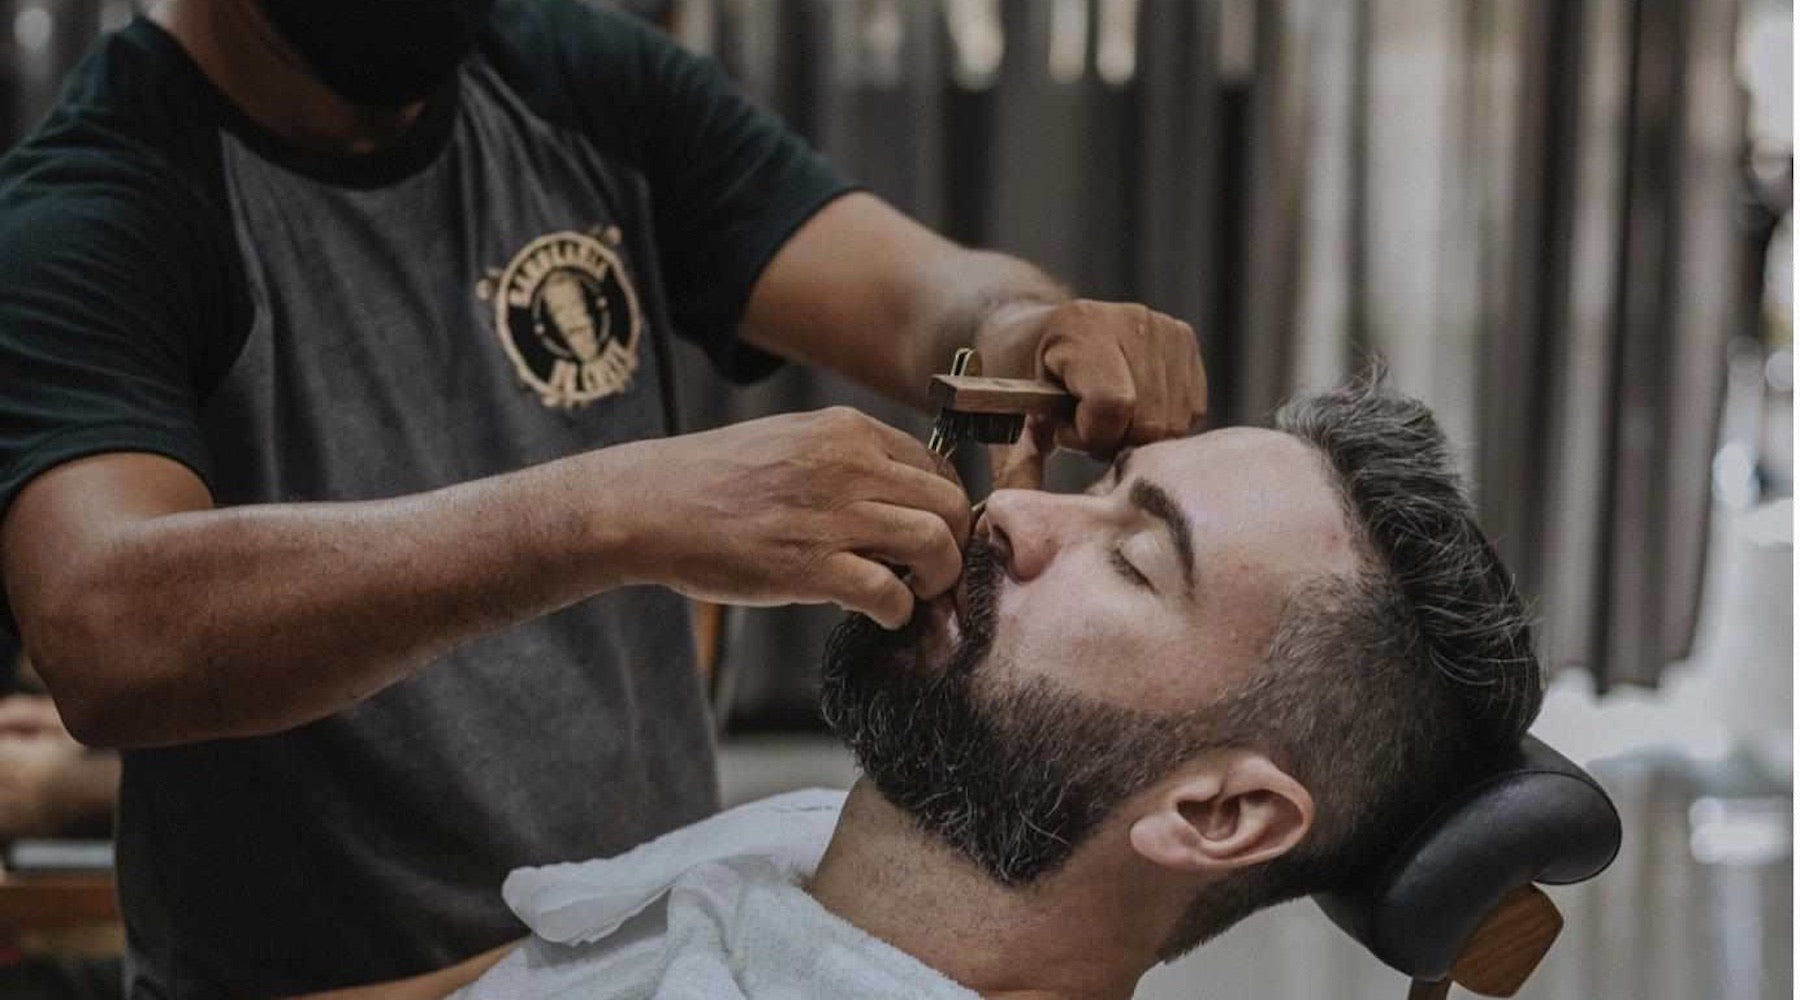 man having his beard trimmed in a barber shop